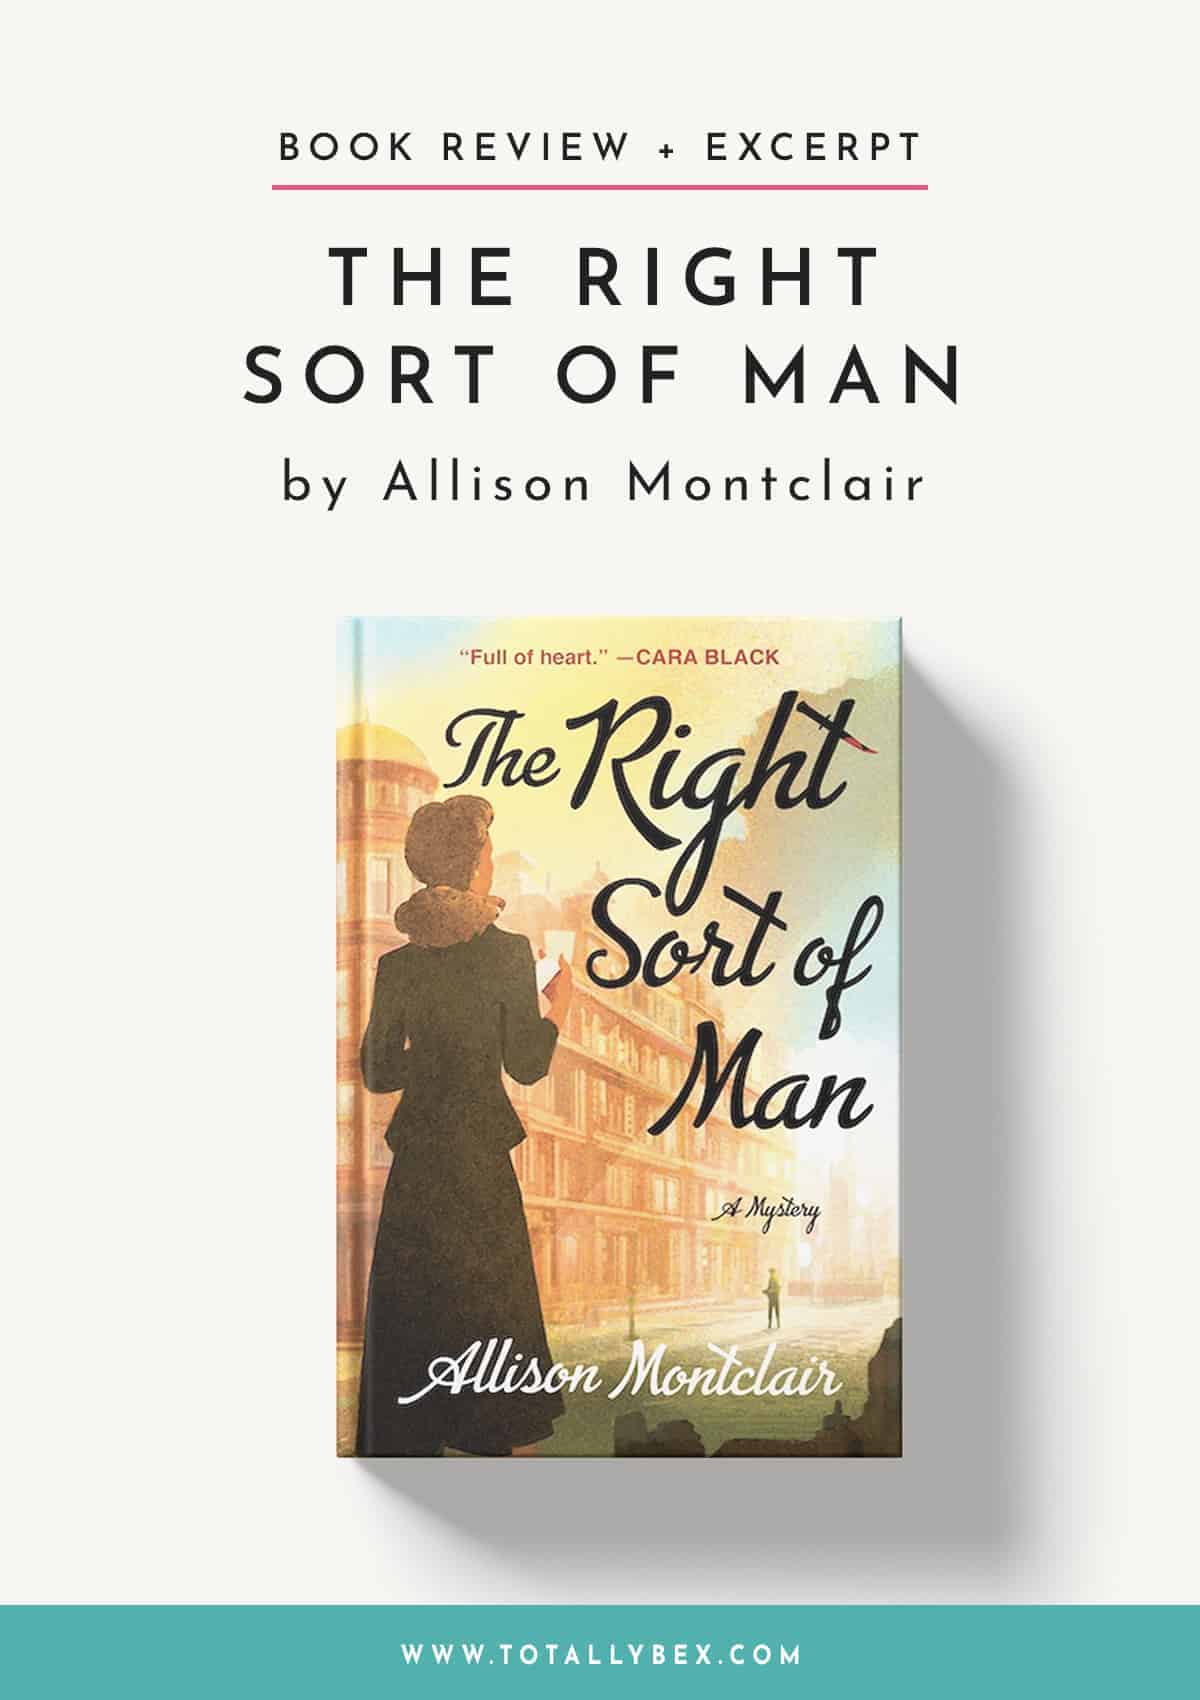 The Right Sort of Man by Allison Montclair is a clever cozy mystery written in snappy prose with vivid imagery of 1940s England (Sparks & Bainbridge Mystery #1)